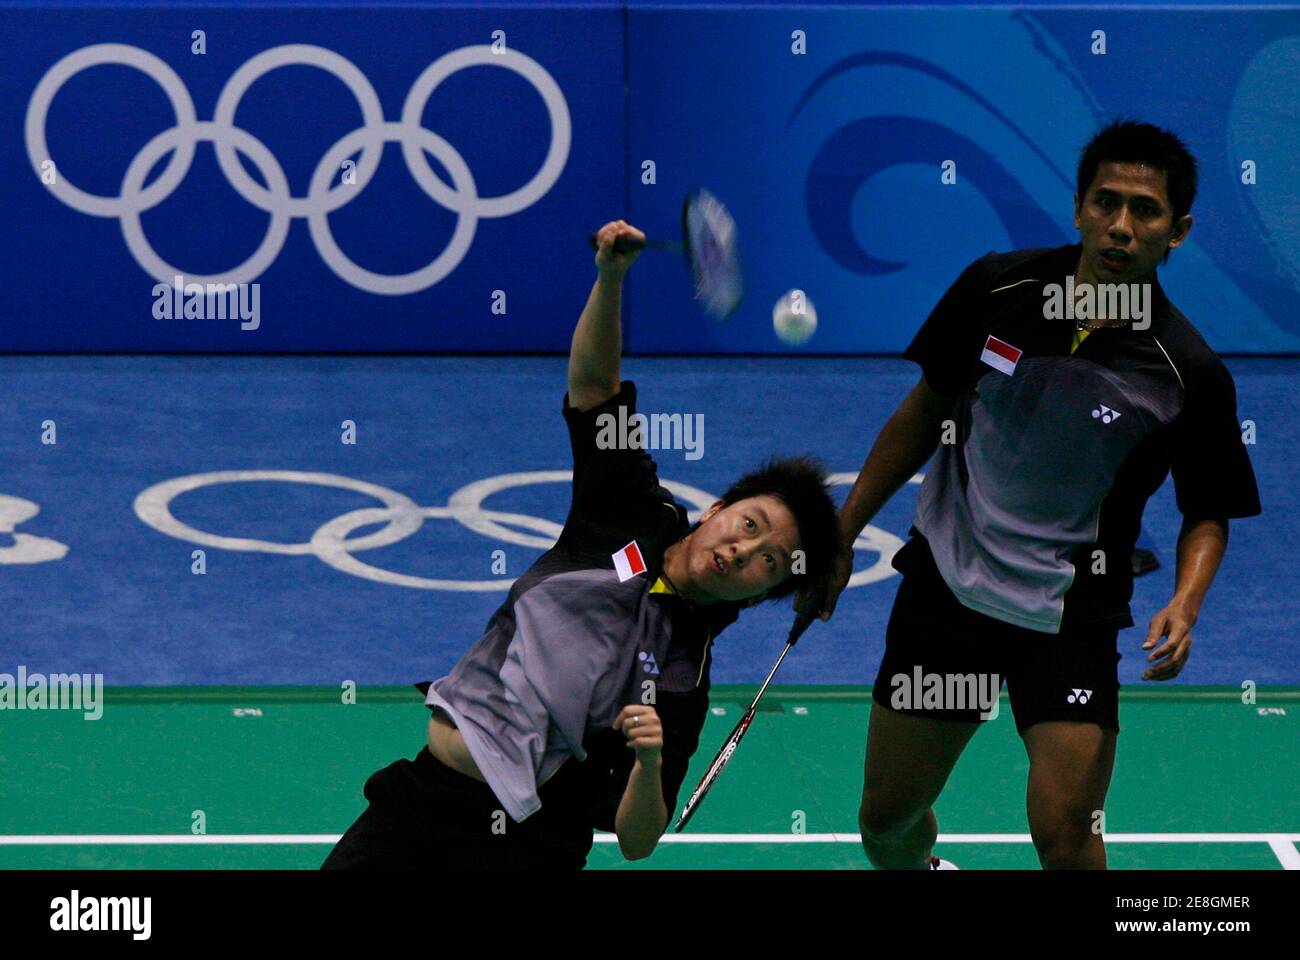 Nova Widianto of Indonesia (R) watches his teammate Liliyana hit a return to Han Sang-hun and Hwang Yu-mi of South Korea during their mixed doubles round of 16 badminton match at the Beijing 2008 Olympic Games, August 12, 2008.     REUTERS/Beawiharta (CHINA) Stock Photo